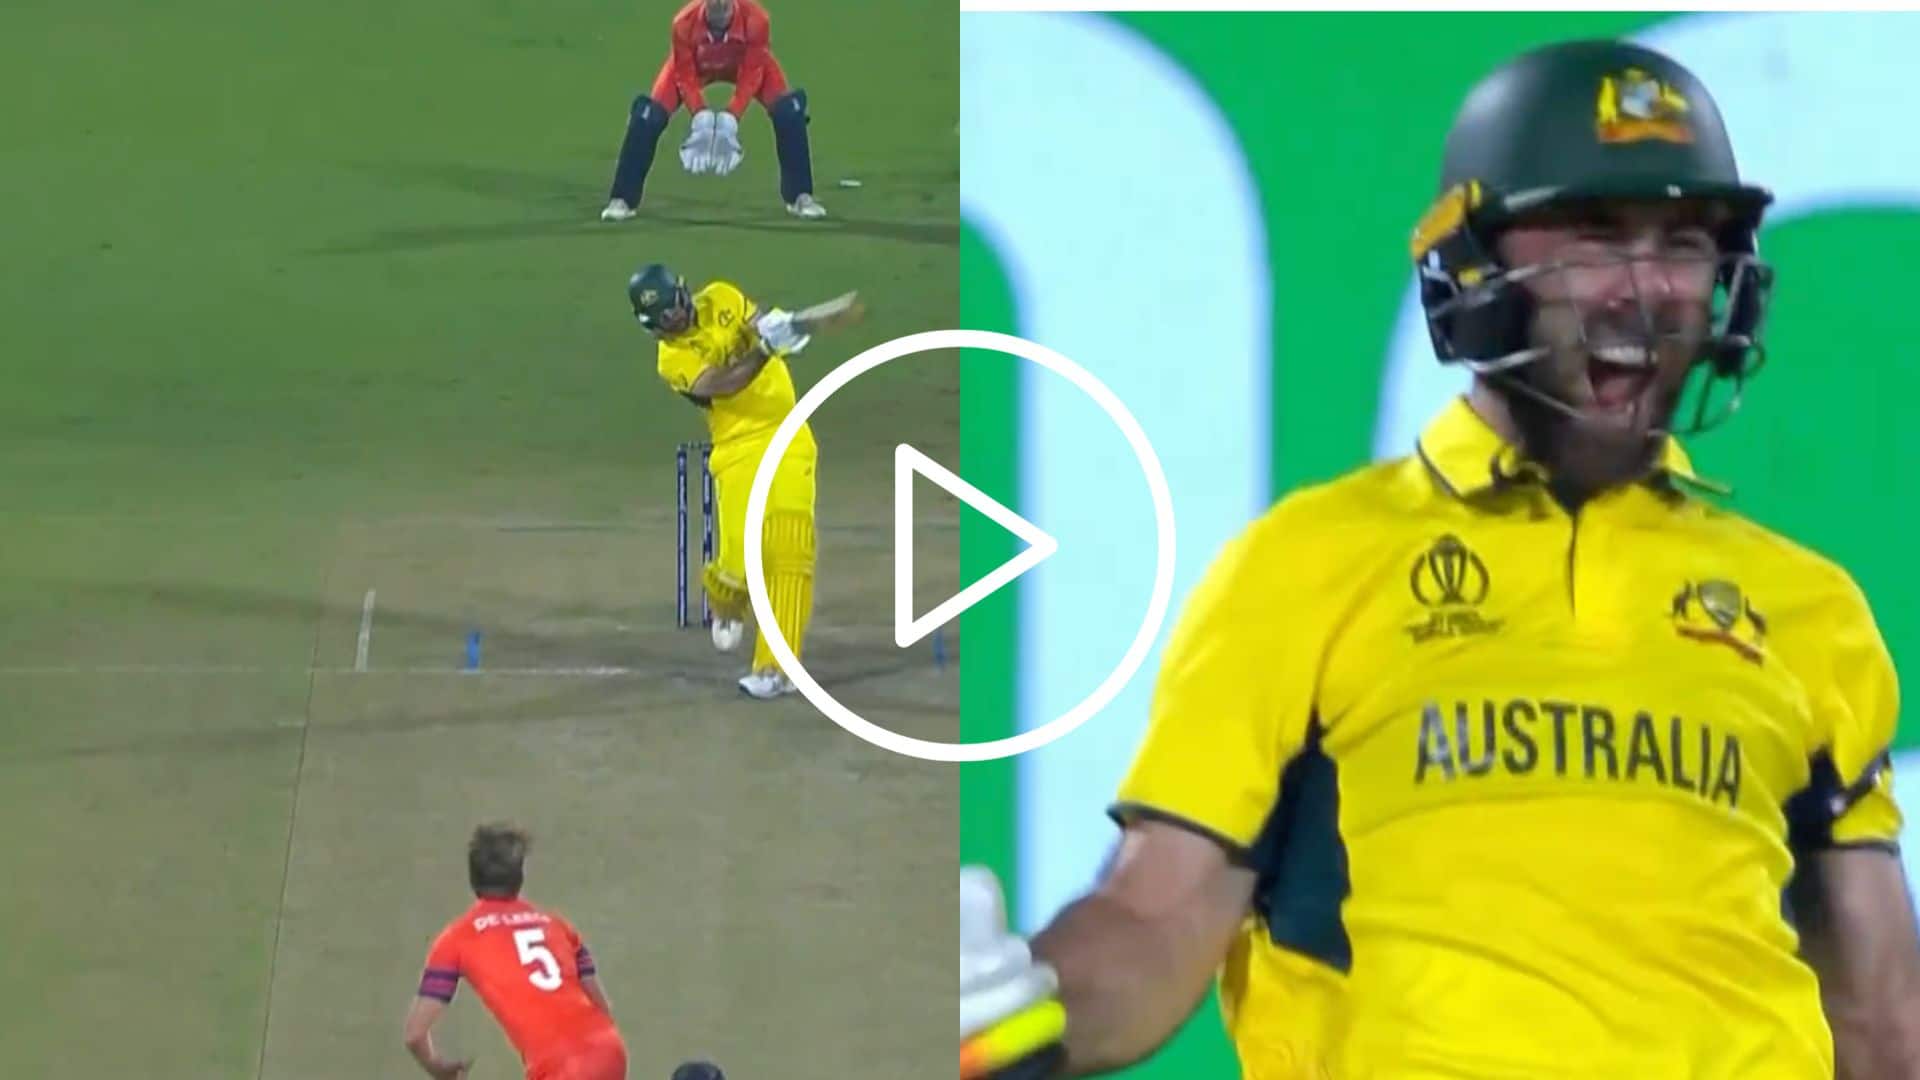 [Watch] Glenn Maxwell Roars After Slamming Fastest World Cup Ton With A Monstrous Six